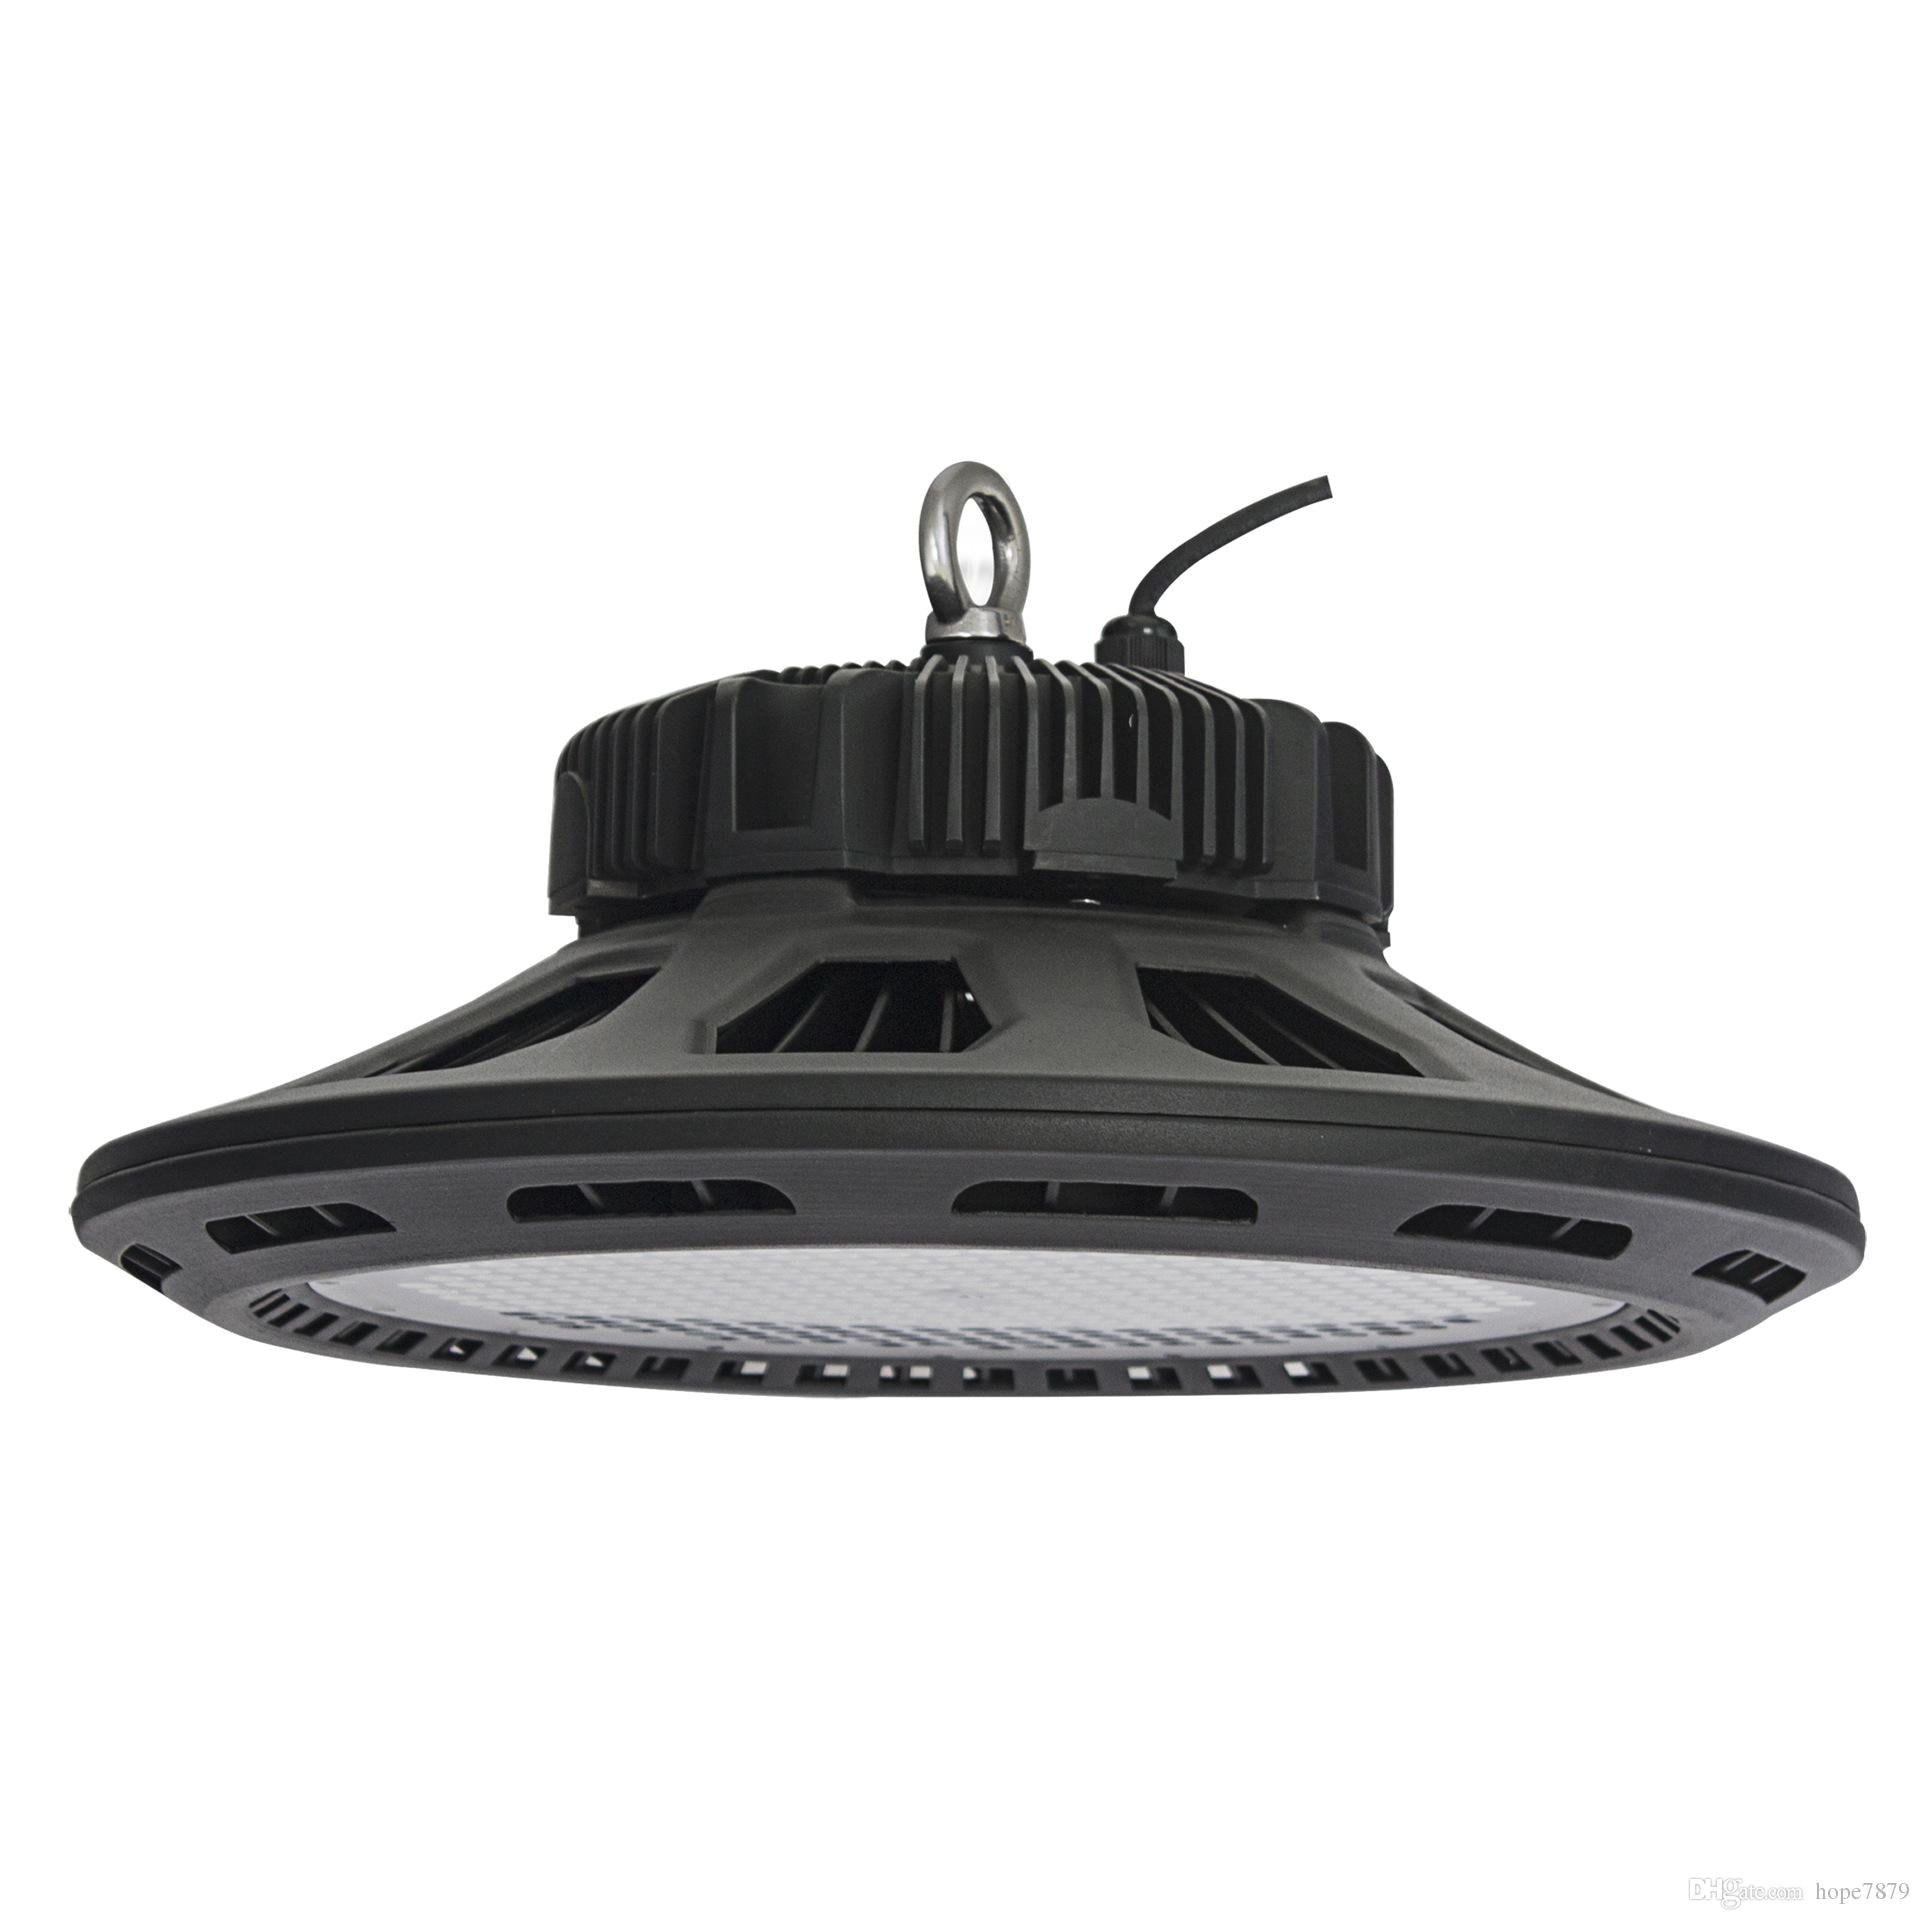 outdoor industrial lighting fixtures new image dhgate 0x0 f2 albu g5 m01 b0 0d rbvai1jr of